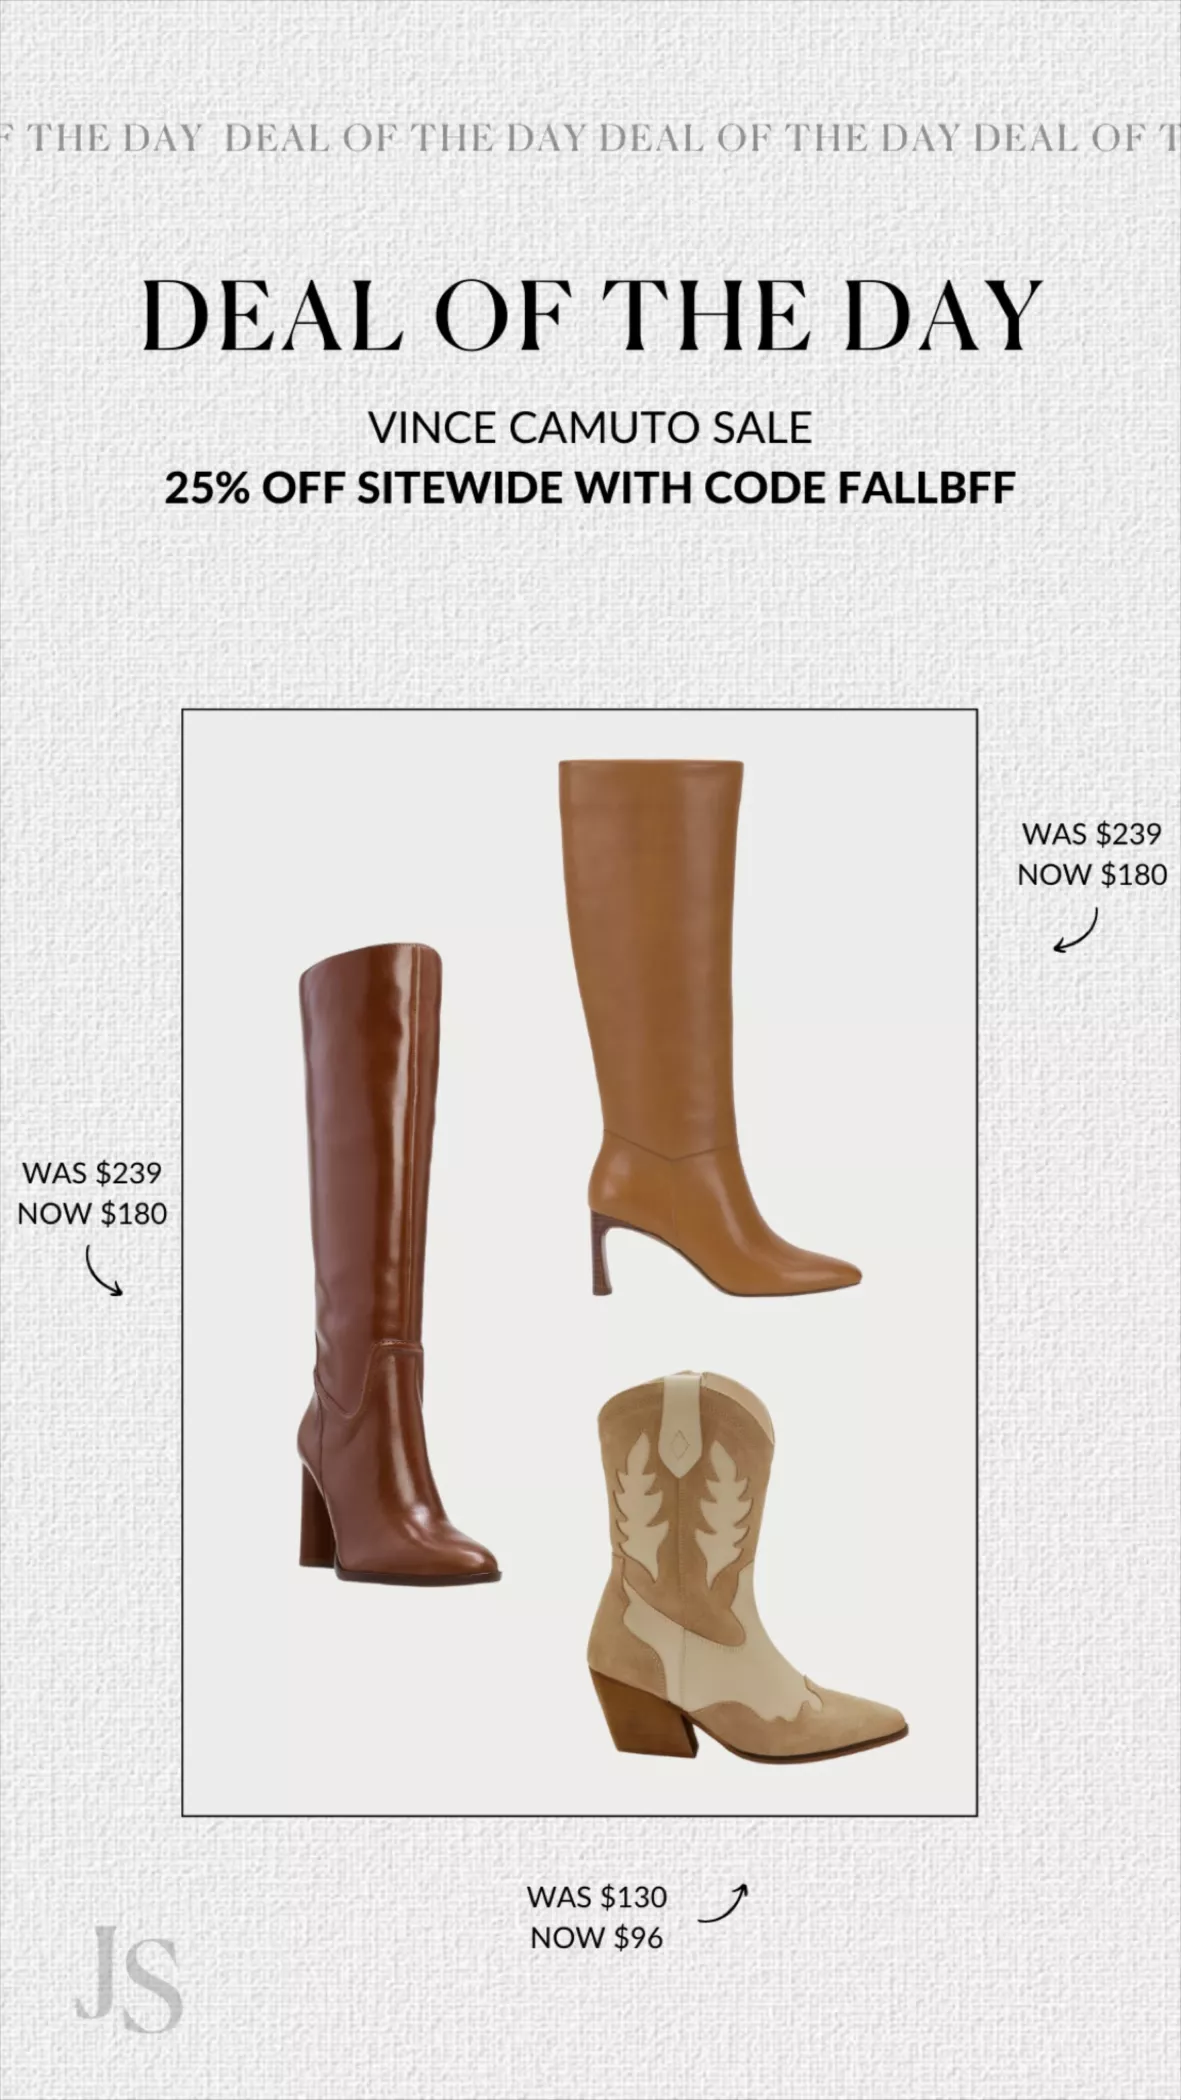 Vince Camuto Offers Wide-Calf Sizing Options for Fall Boot Collection